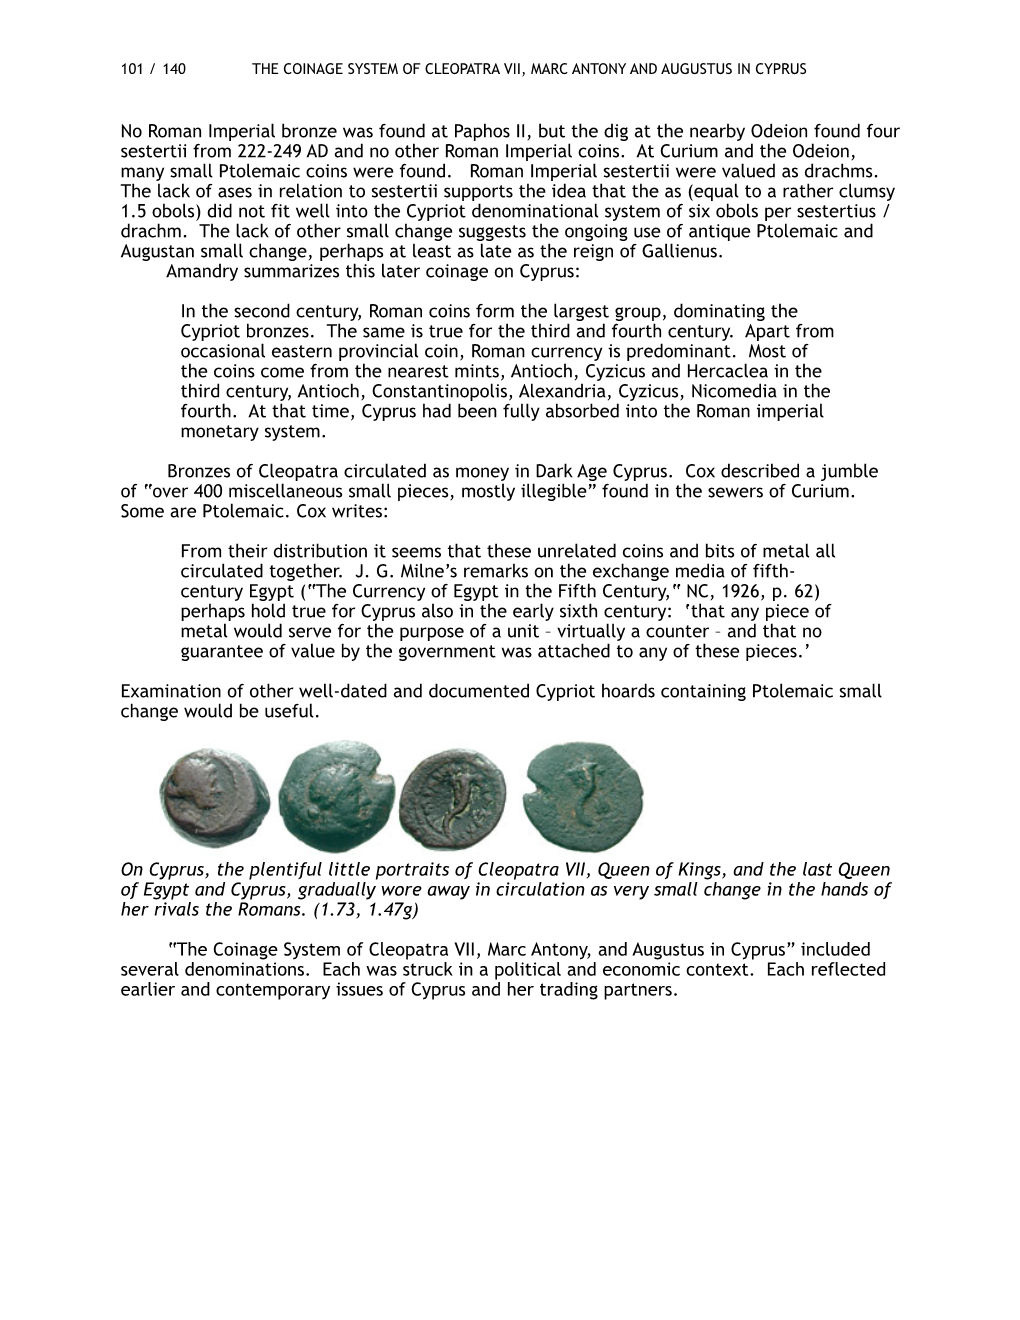 No Roman Imperial Bronze Was Found at Paphos II, but the Dig at the Nearby Odeion Found Four Sestertii from 222-249 AD and No Other Roman Imperial Coins